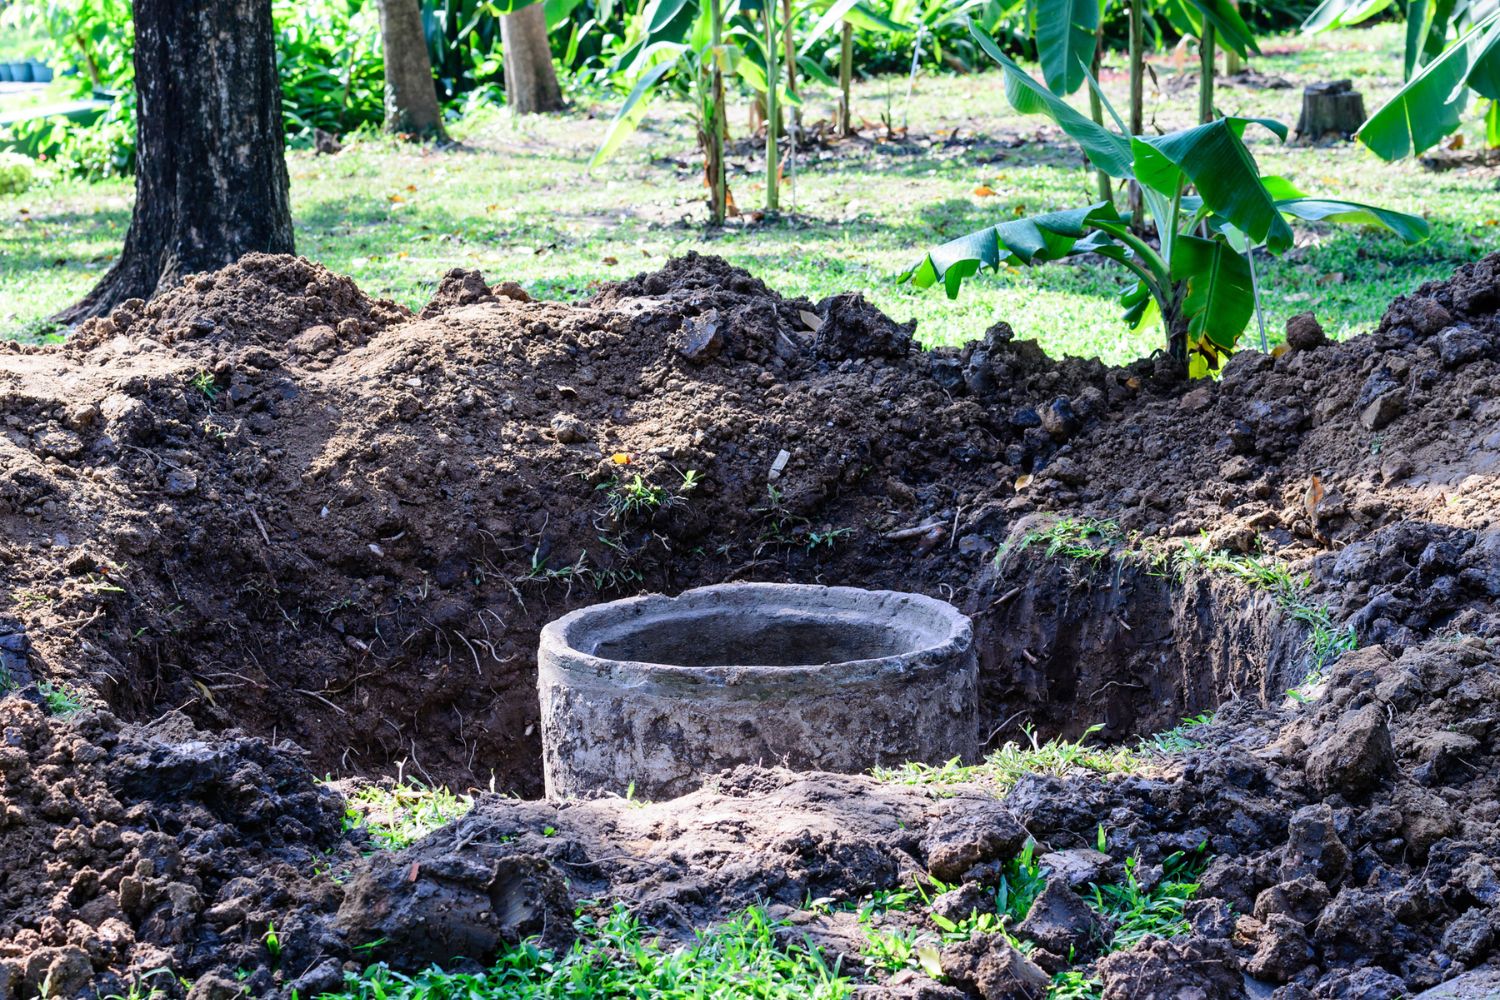 A drain is exposed in a hole in a yard.